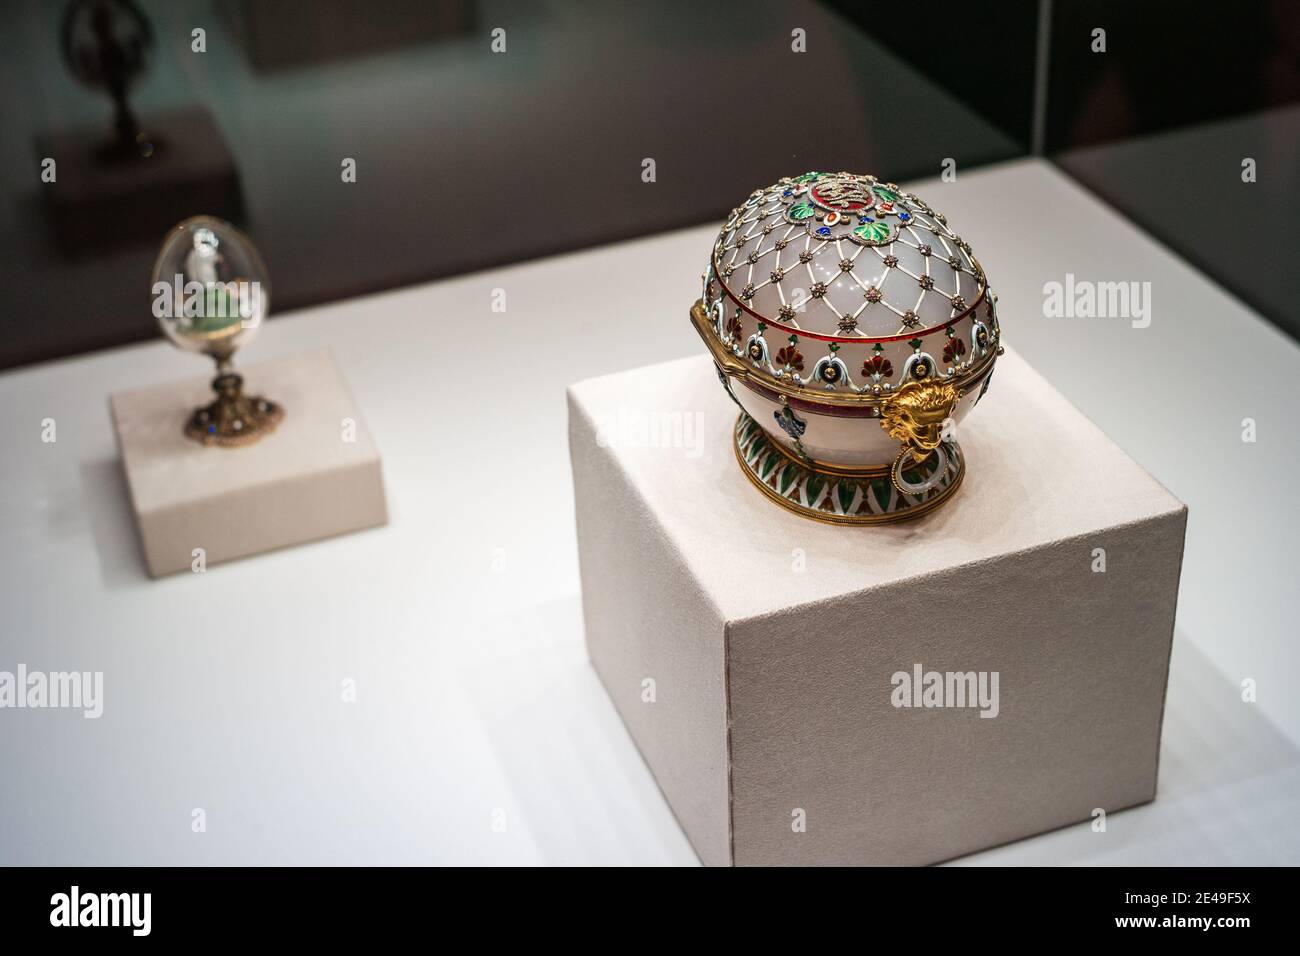 Saint Petersburg, Russia - ca. December 2017: White Agate Faberge Easter Egg  called Renaissance Egg at the Faberge Museum in the Shuvalov Palace. Stock Photo